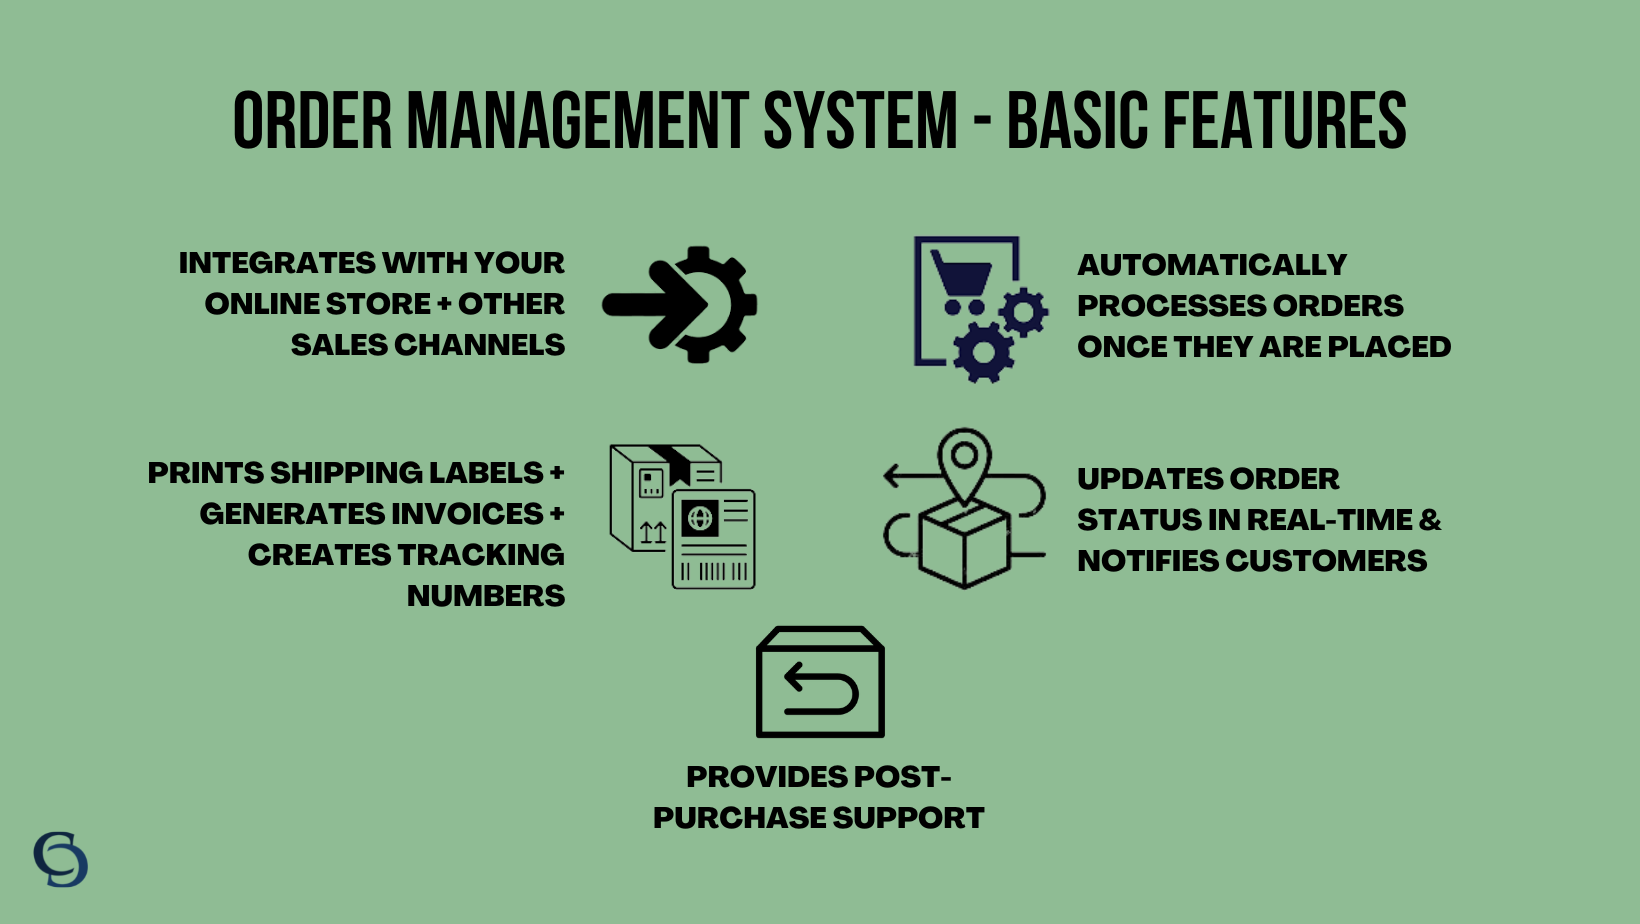 Basic features of an order management system